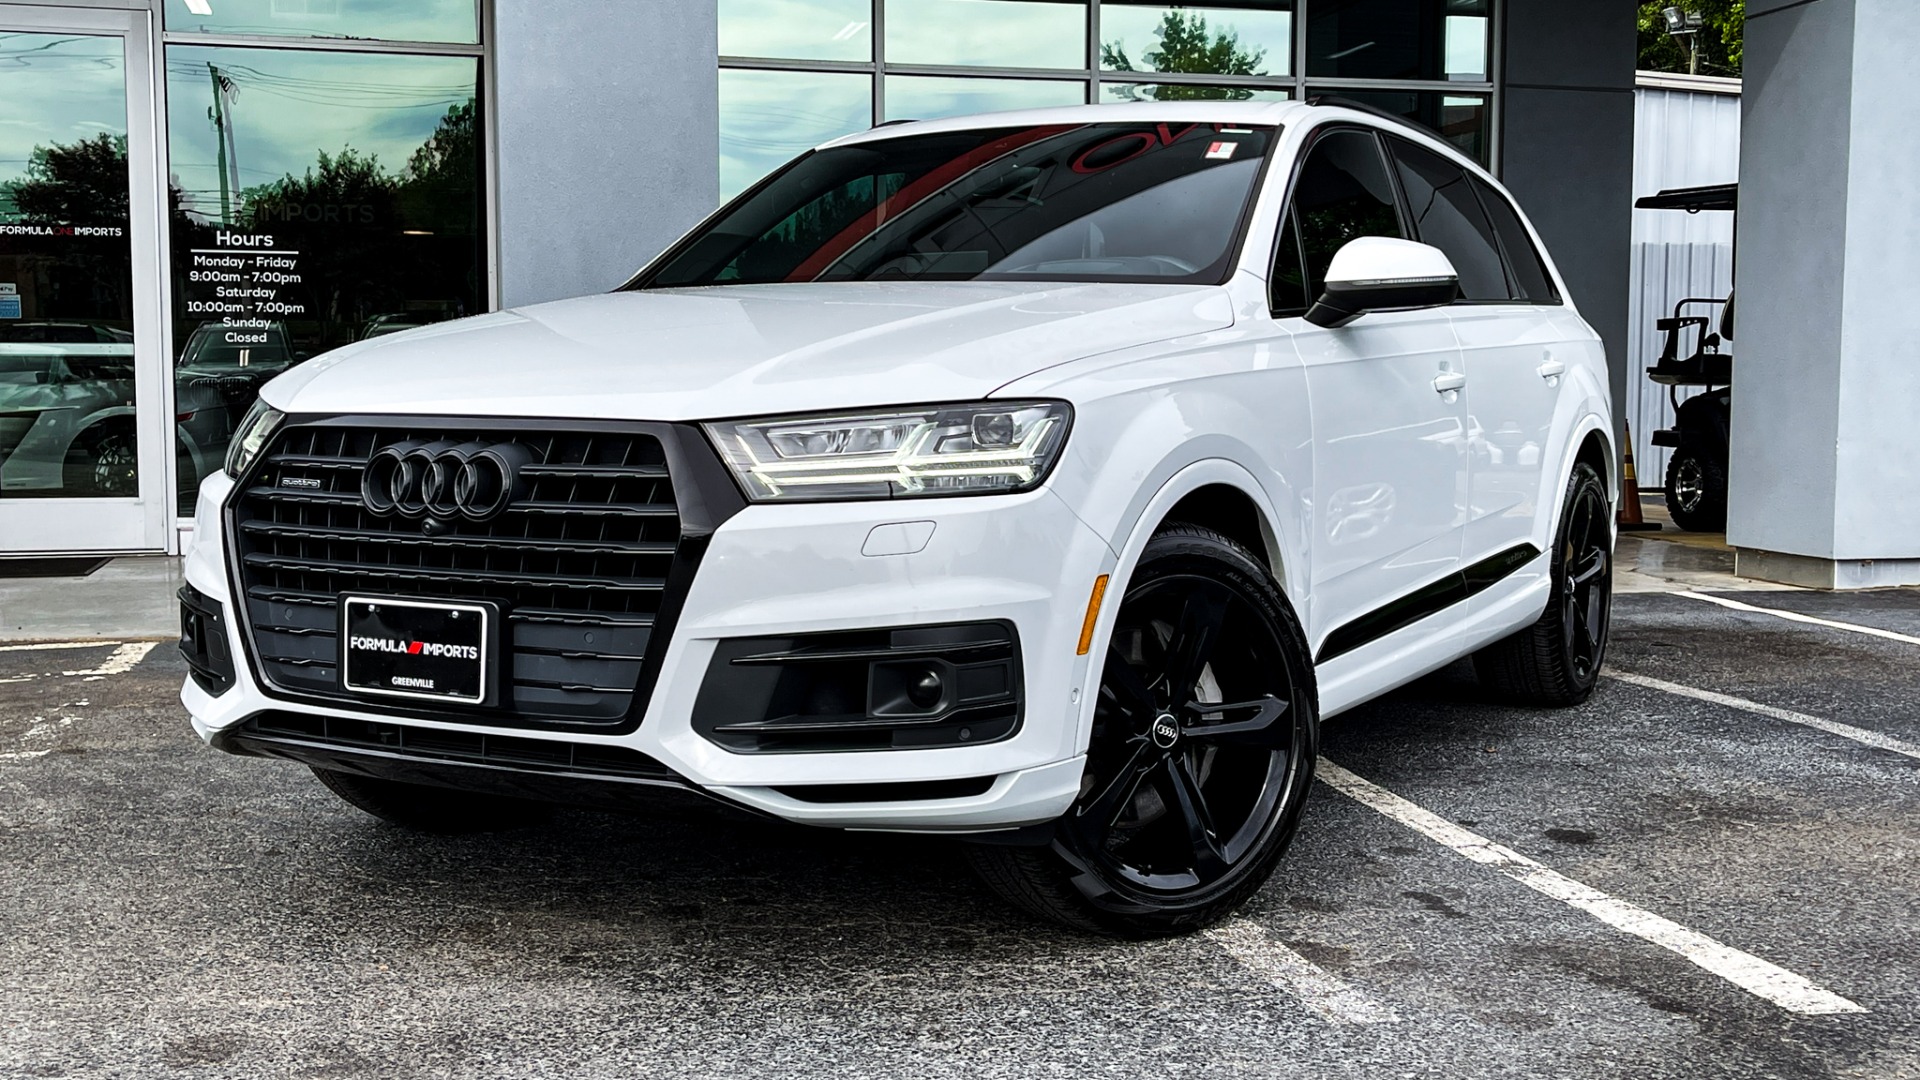 Used 2019 Audi Q7 PRESTIGE / NAV / SUNROOF / LANE ASST / TOWING / 21-IN WHLS / REA for sale $63,695 at Formula Imports in Charlotte NC 28227 1